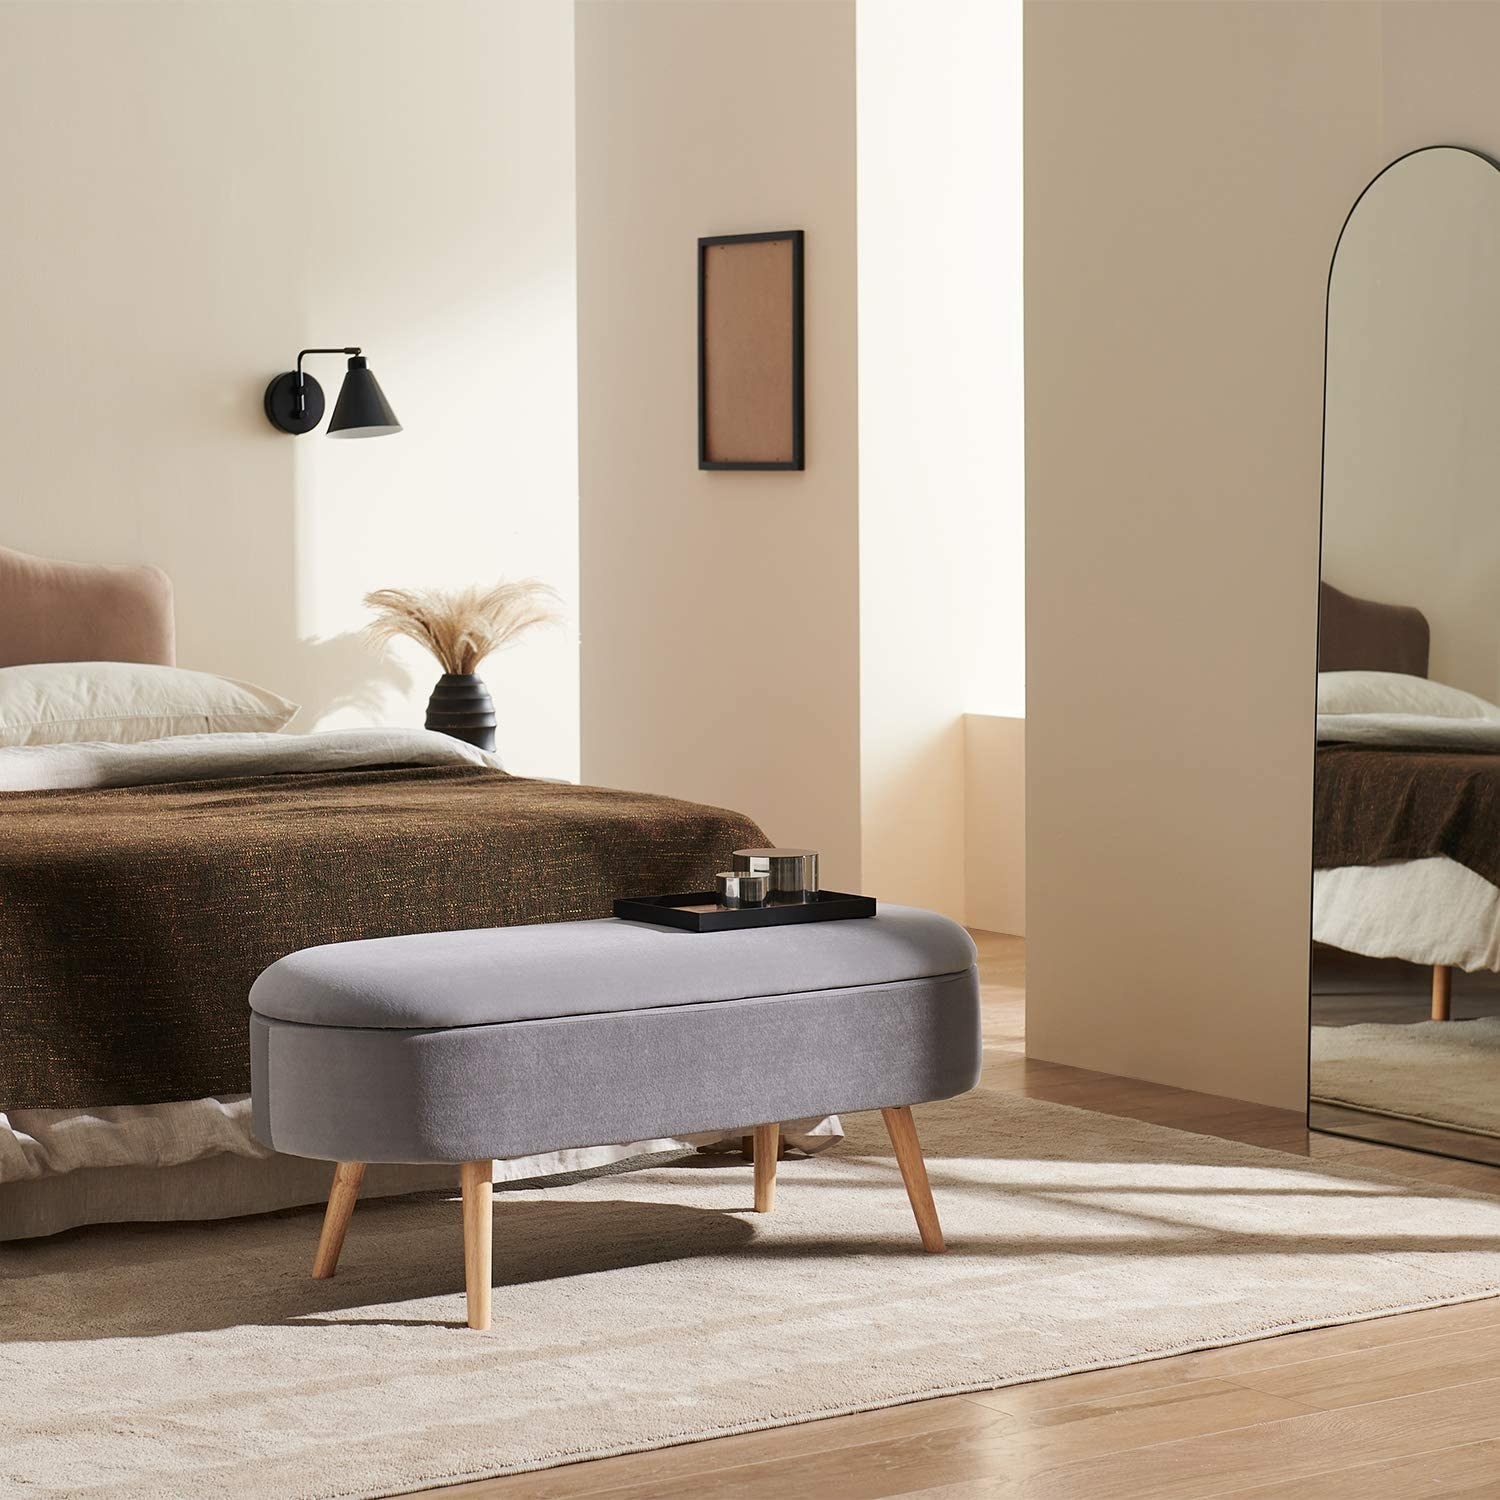 oval mid century modern storage bench at foot of a bed